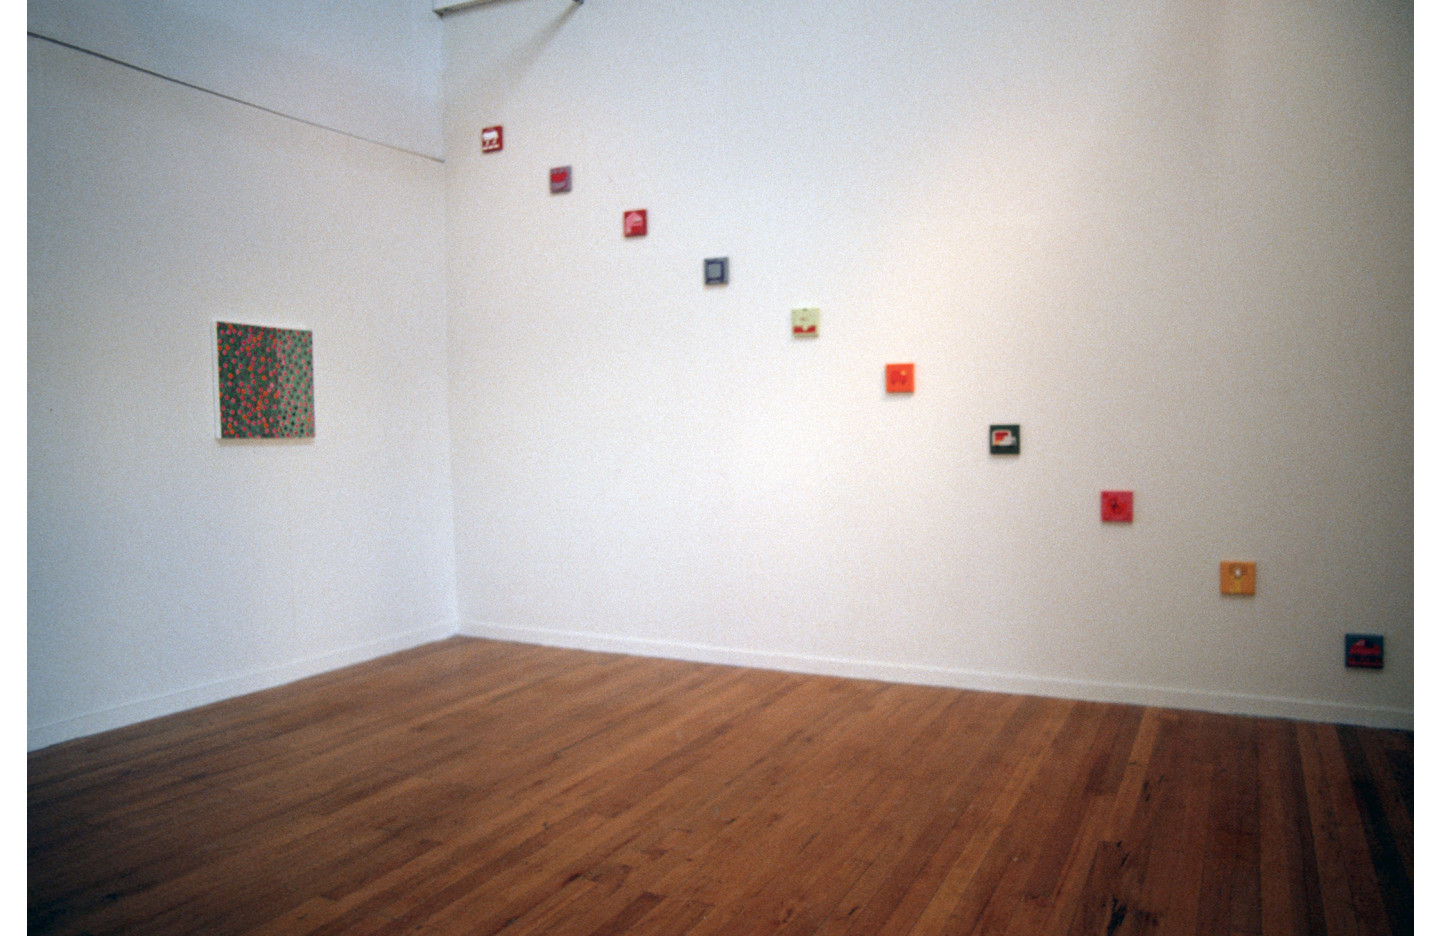 From, Ramp Gallery (2000)